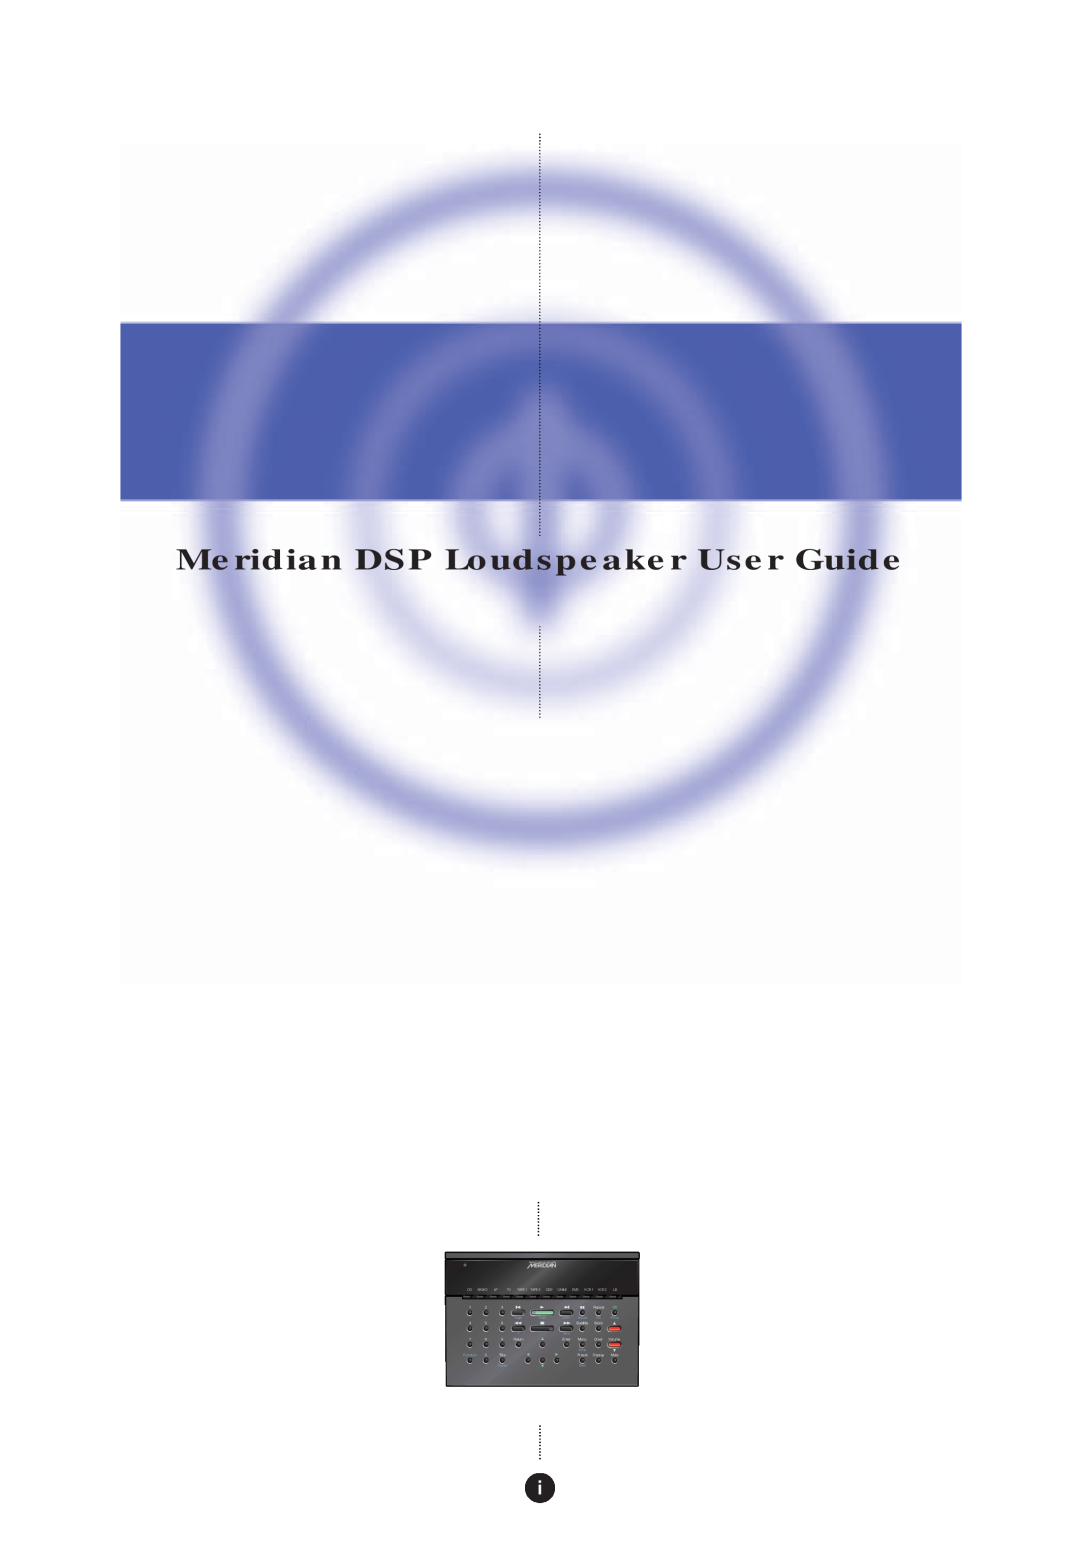 Meridian America Meridian DSP Loudspeaker User Guide, Repeat, Angle, Audio, Record, Phase, Subtitle, Store, Slow, Enter 